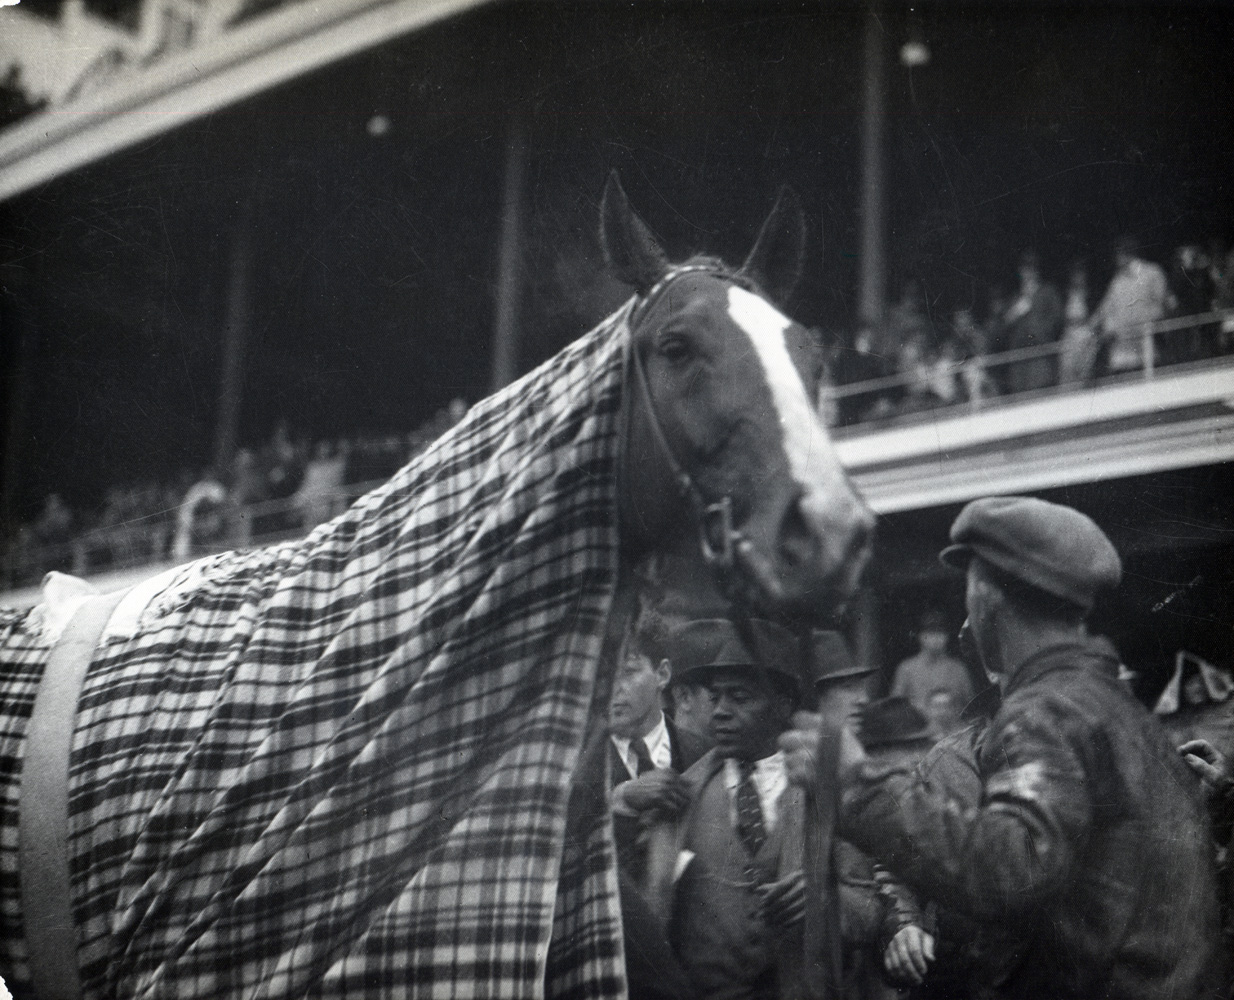 Omaha cooling down after a race in 1935 (Caulfield & Shook/Museum Collection)